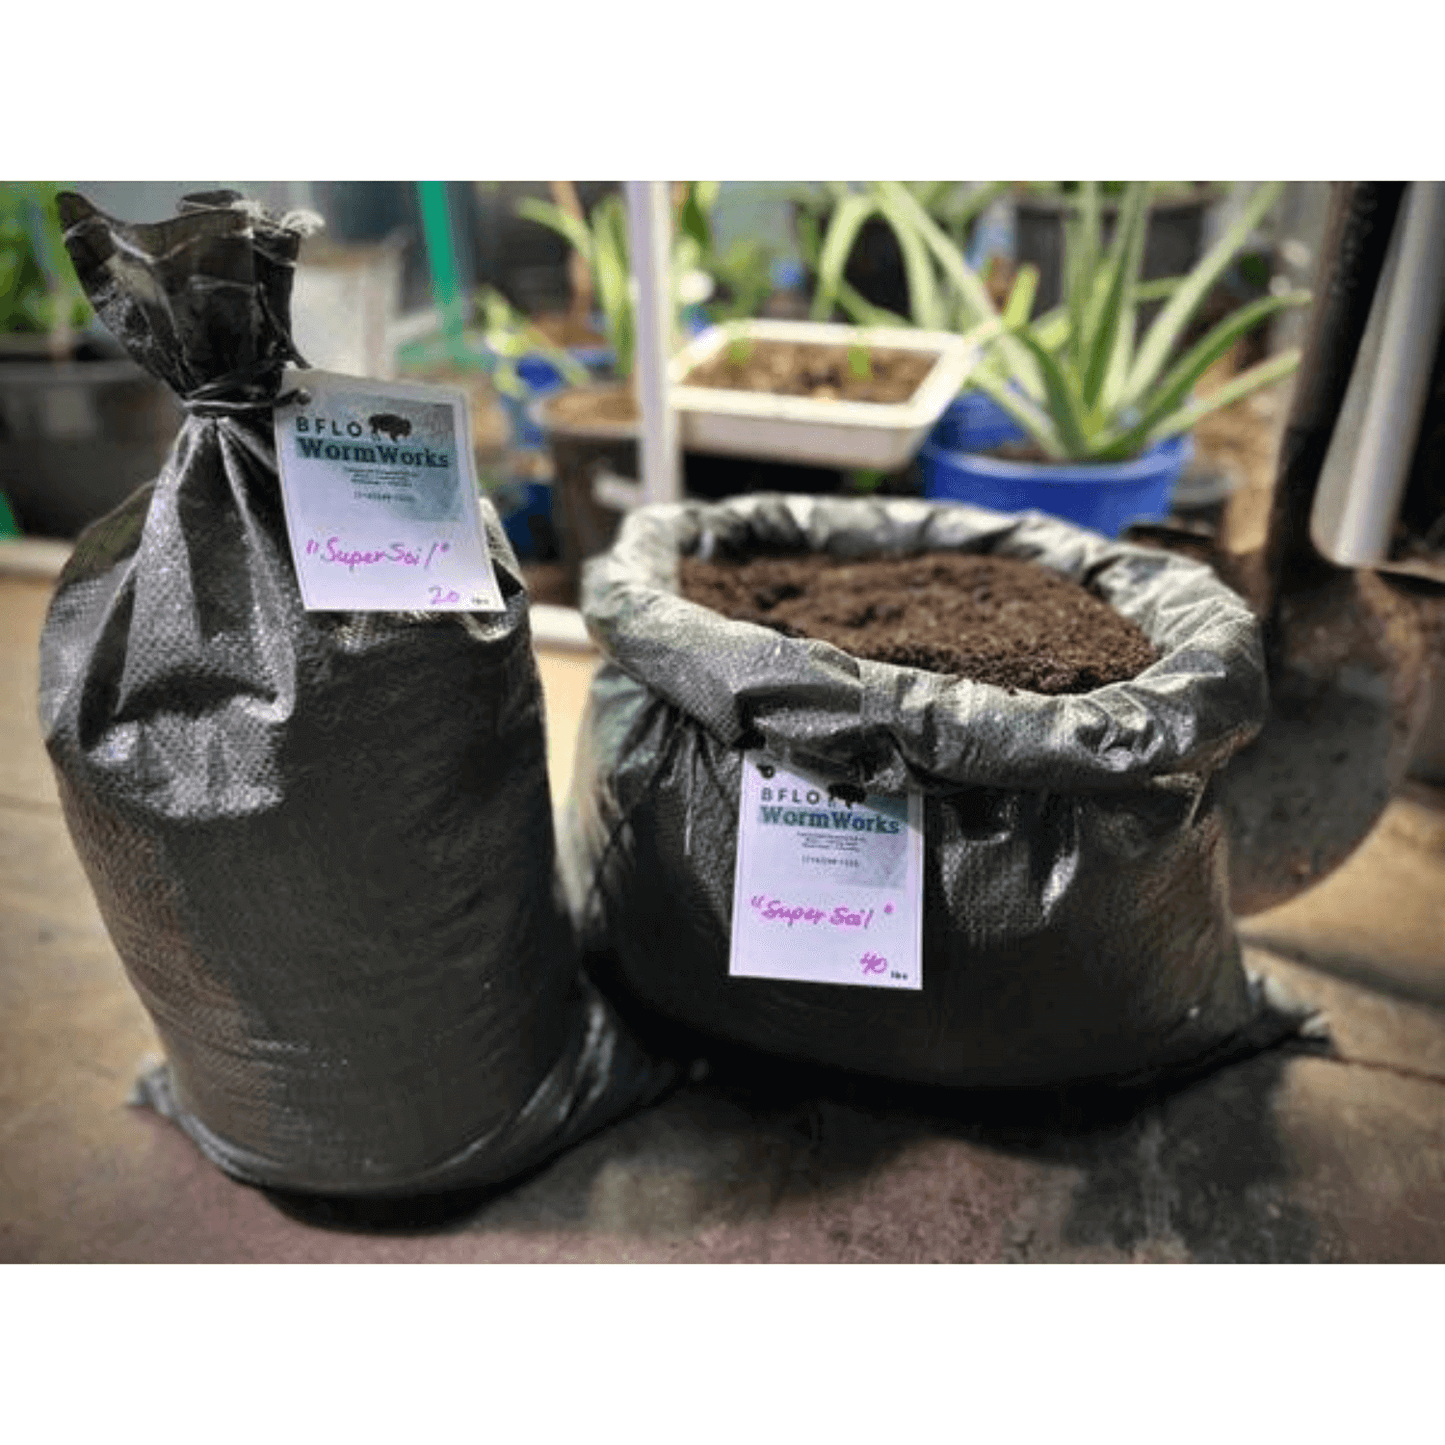 BFLO Worm Works Worm Castings, 2 lb Pouch BFLOWW2 Planting & Watering